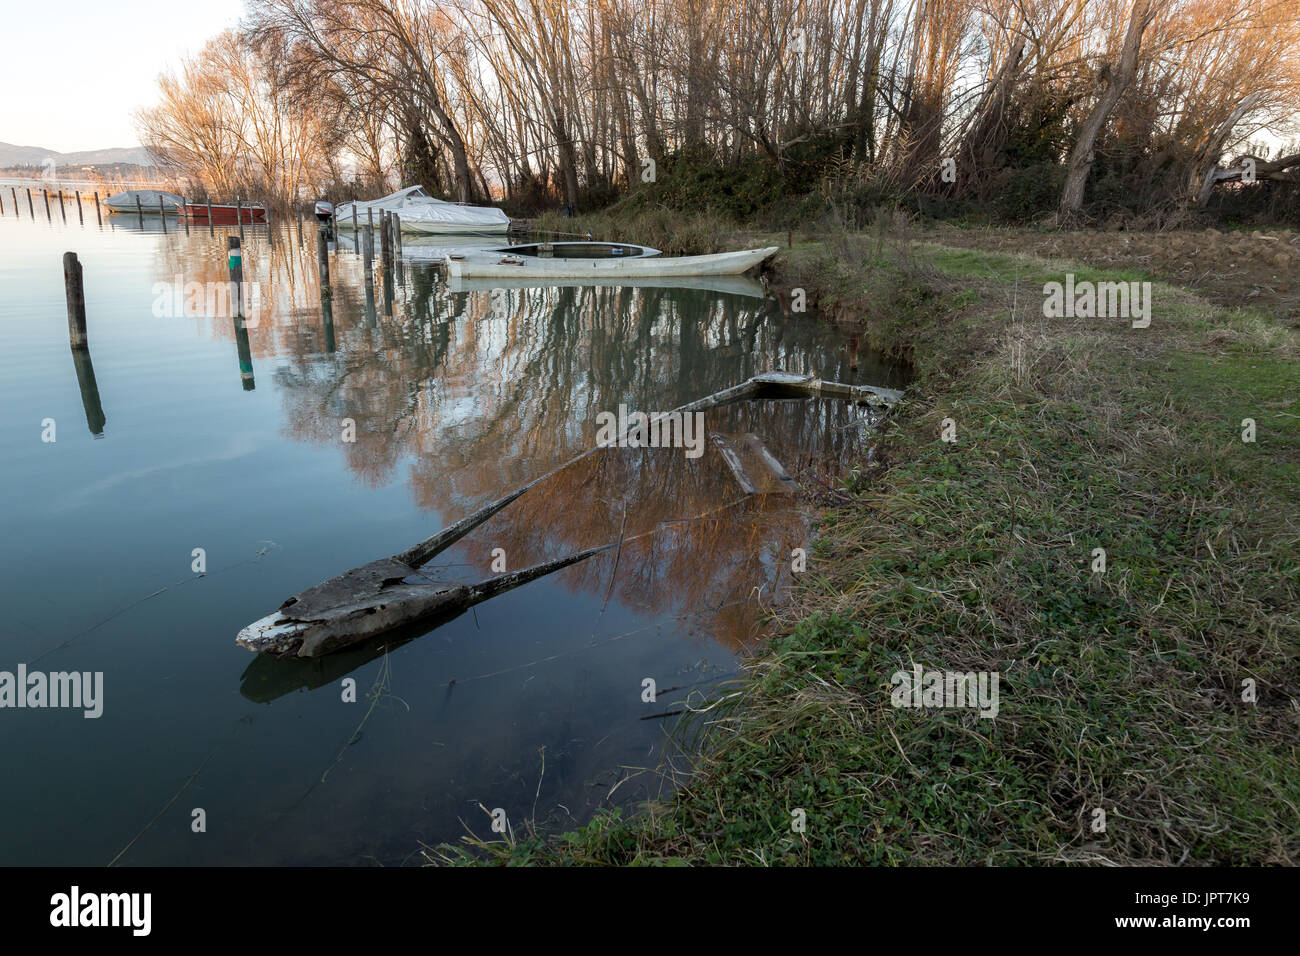 A sinking, little boat full of water near a lake shore, with trees reflections Stock Photo